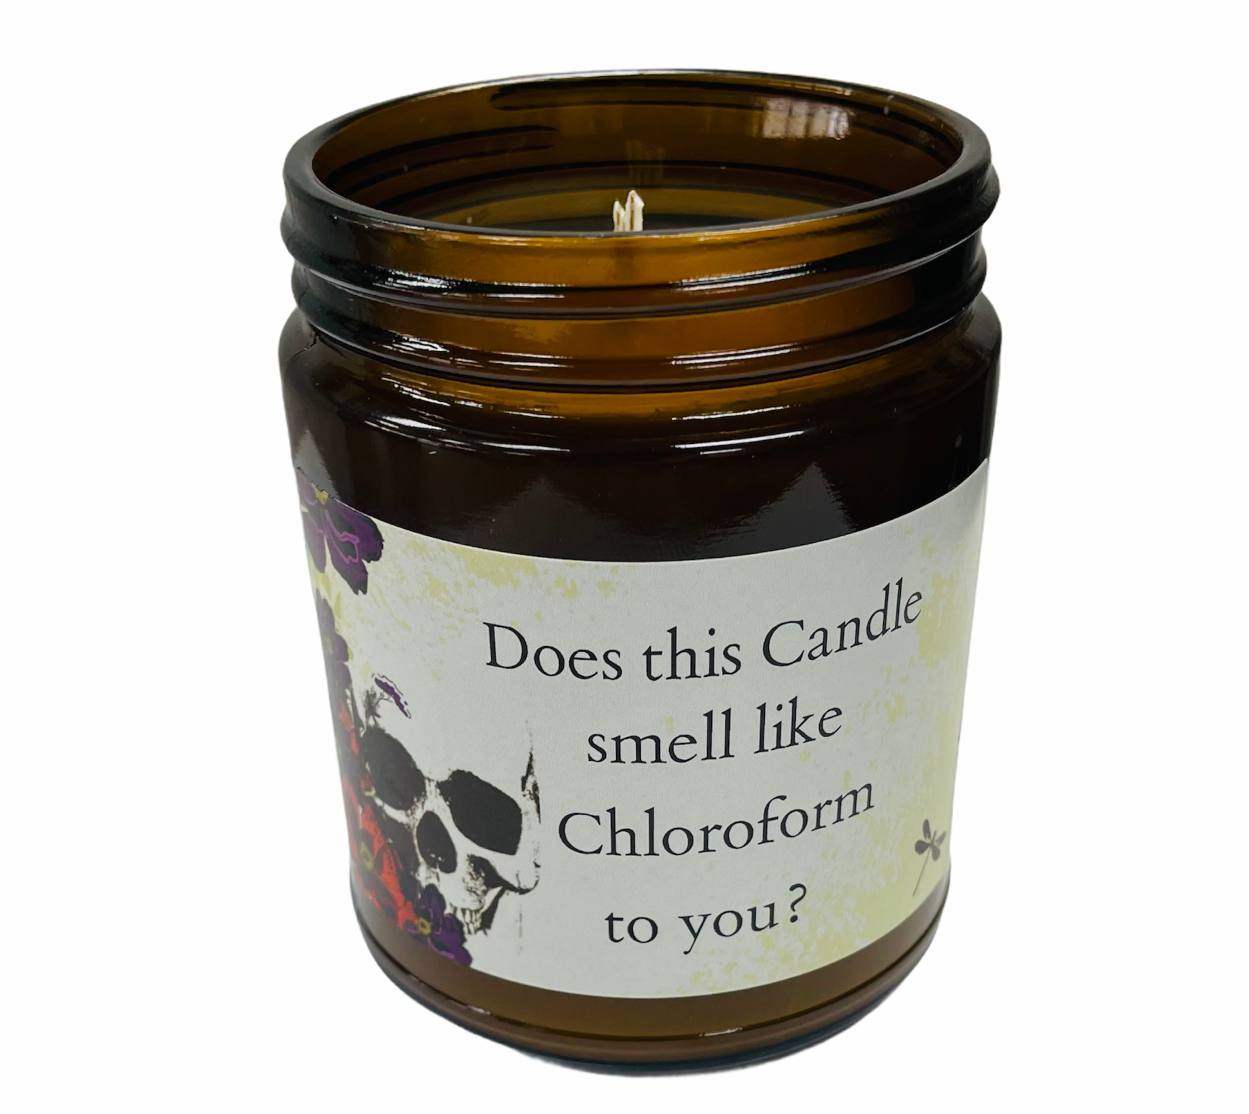 Does this candle SMELL LIKE CHLOROFORM to you?